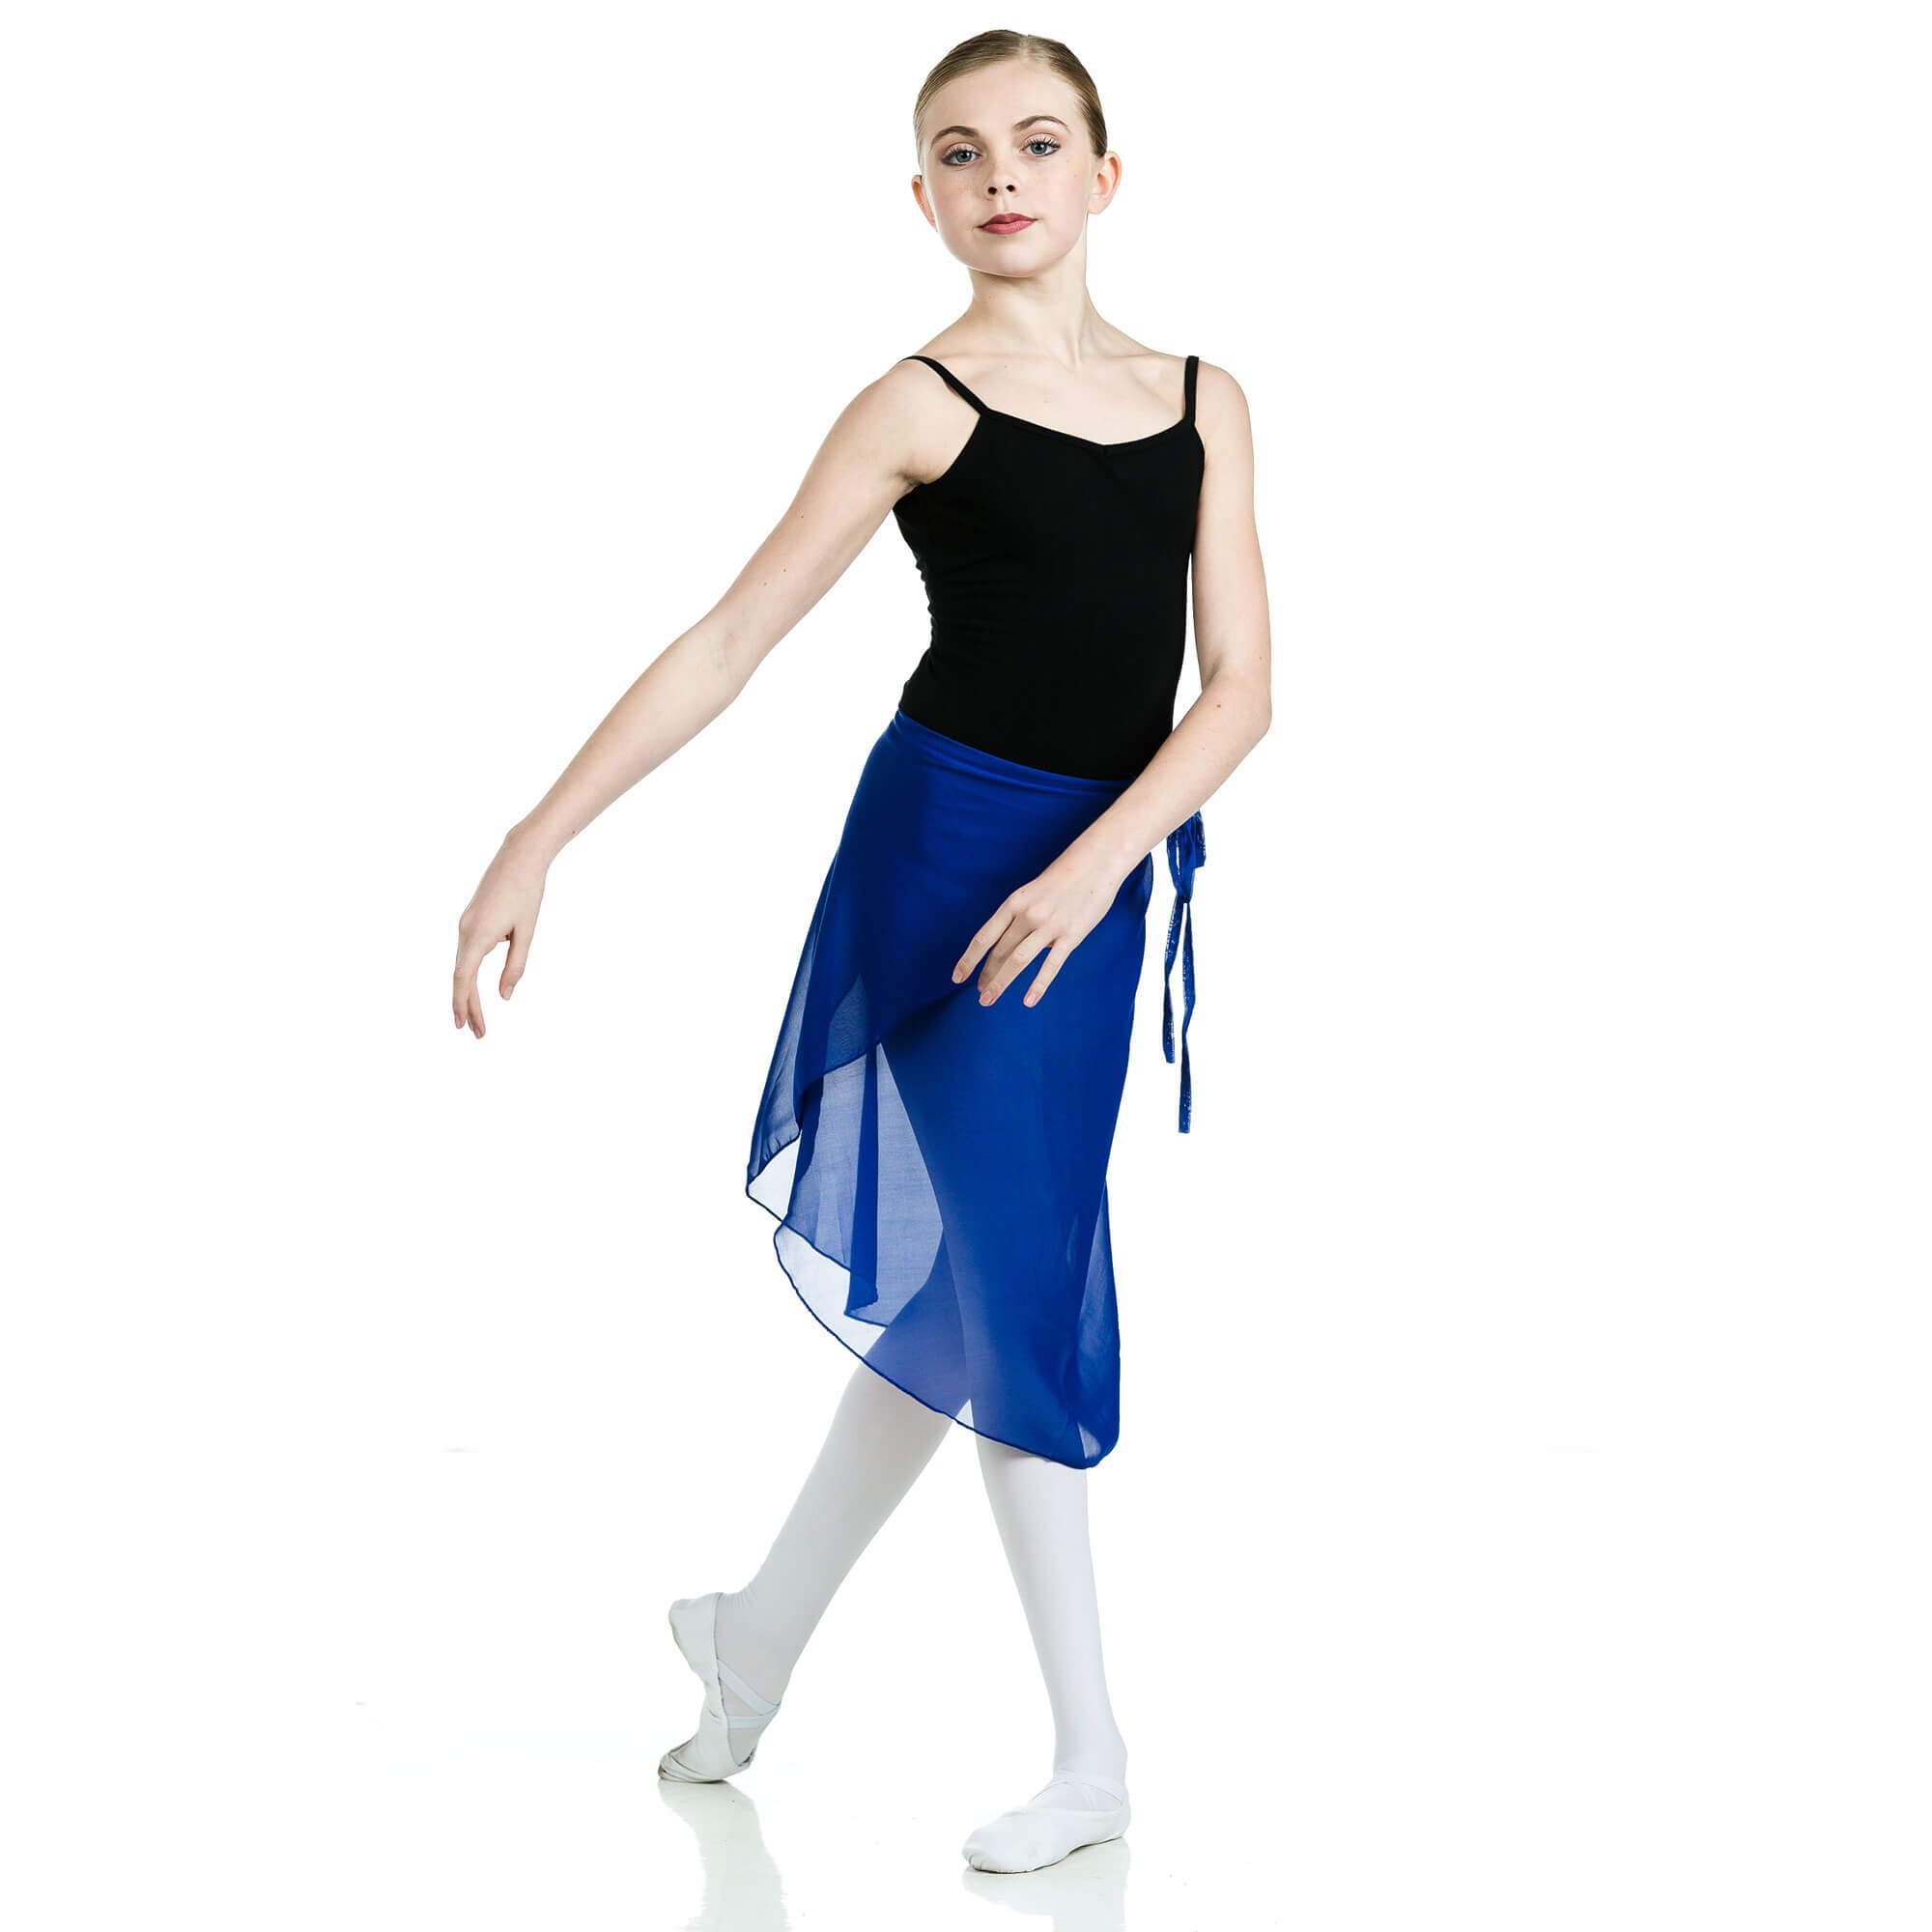 Danzcue Adult Wrap Ballet Dance Skirt - Click Image to Close